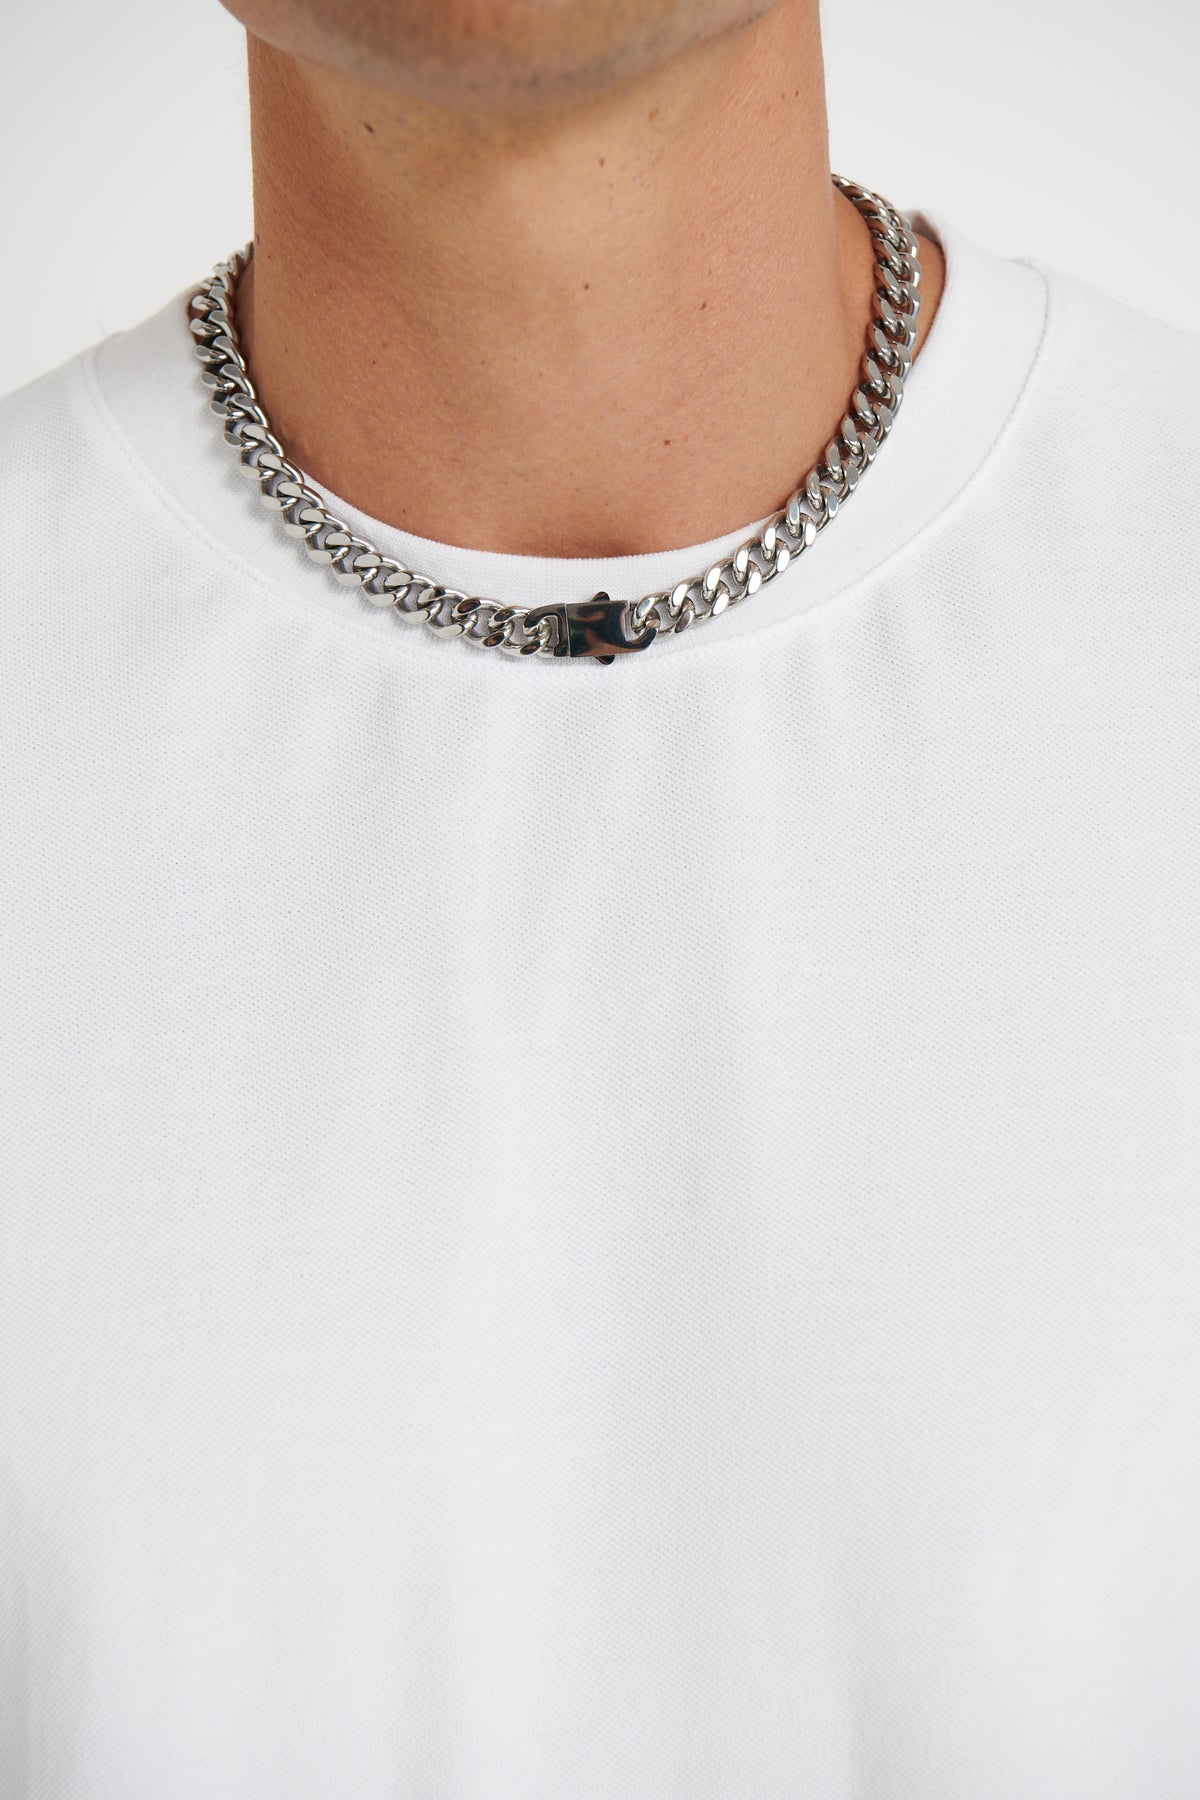 NTH 10mm Curb Chain Necklace Silver